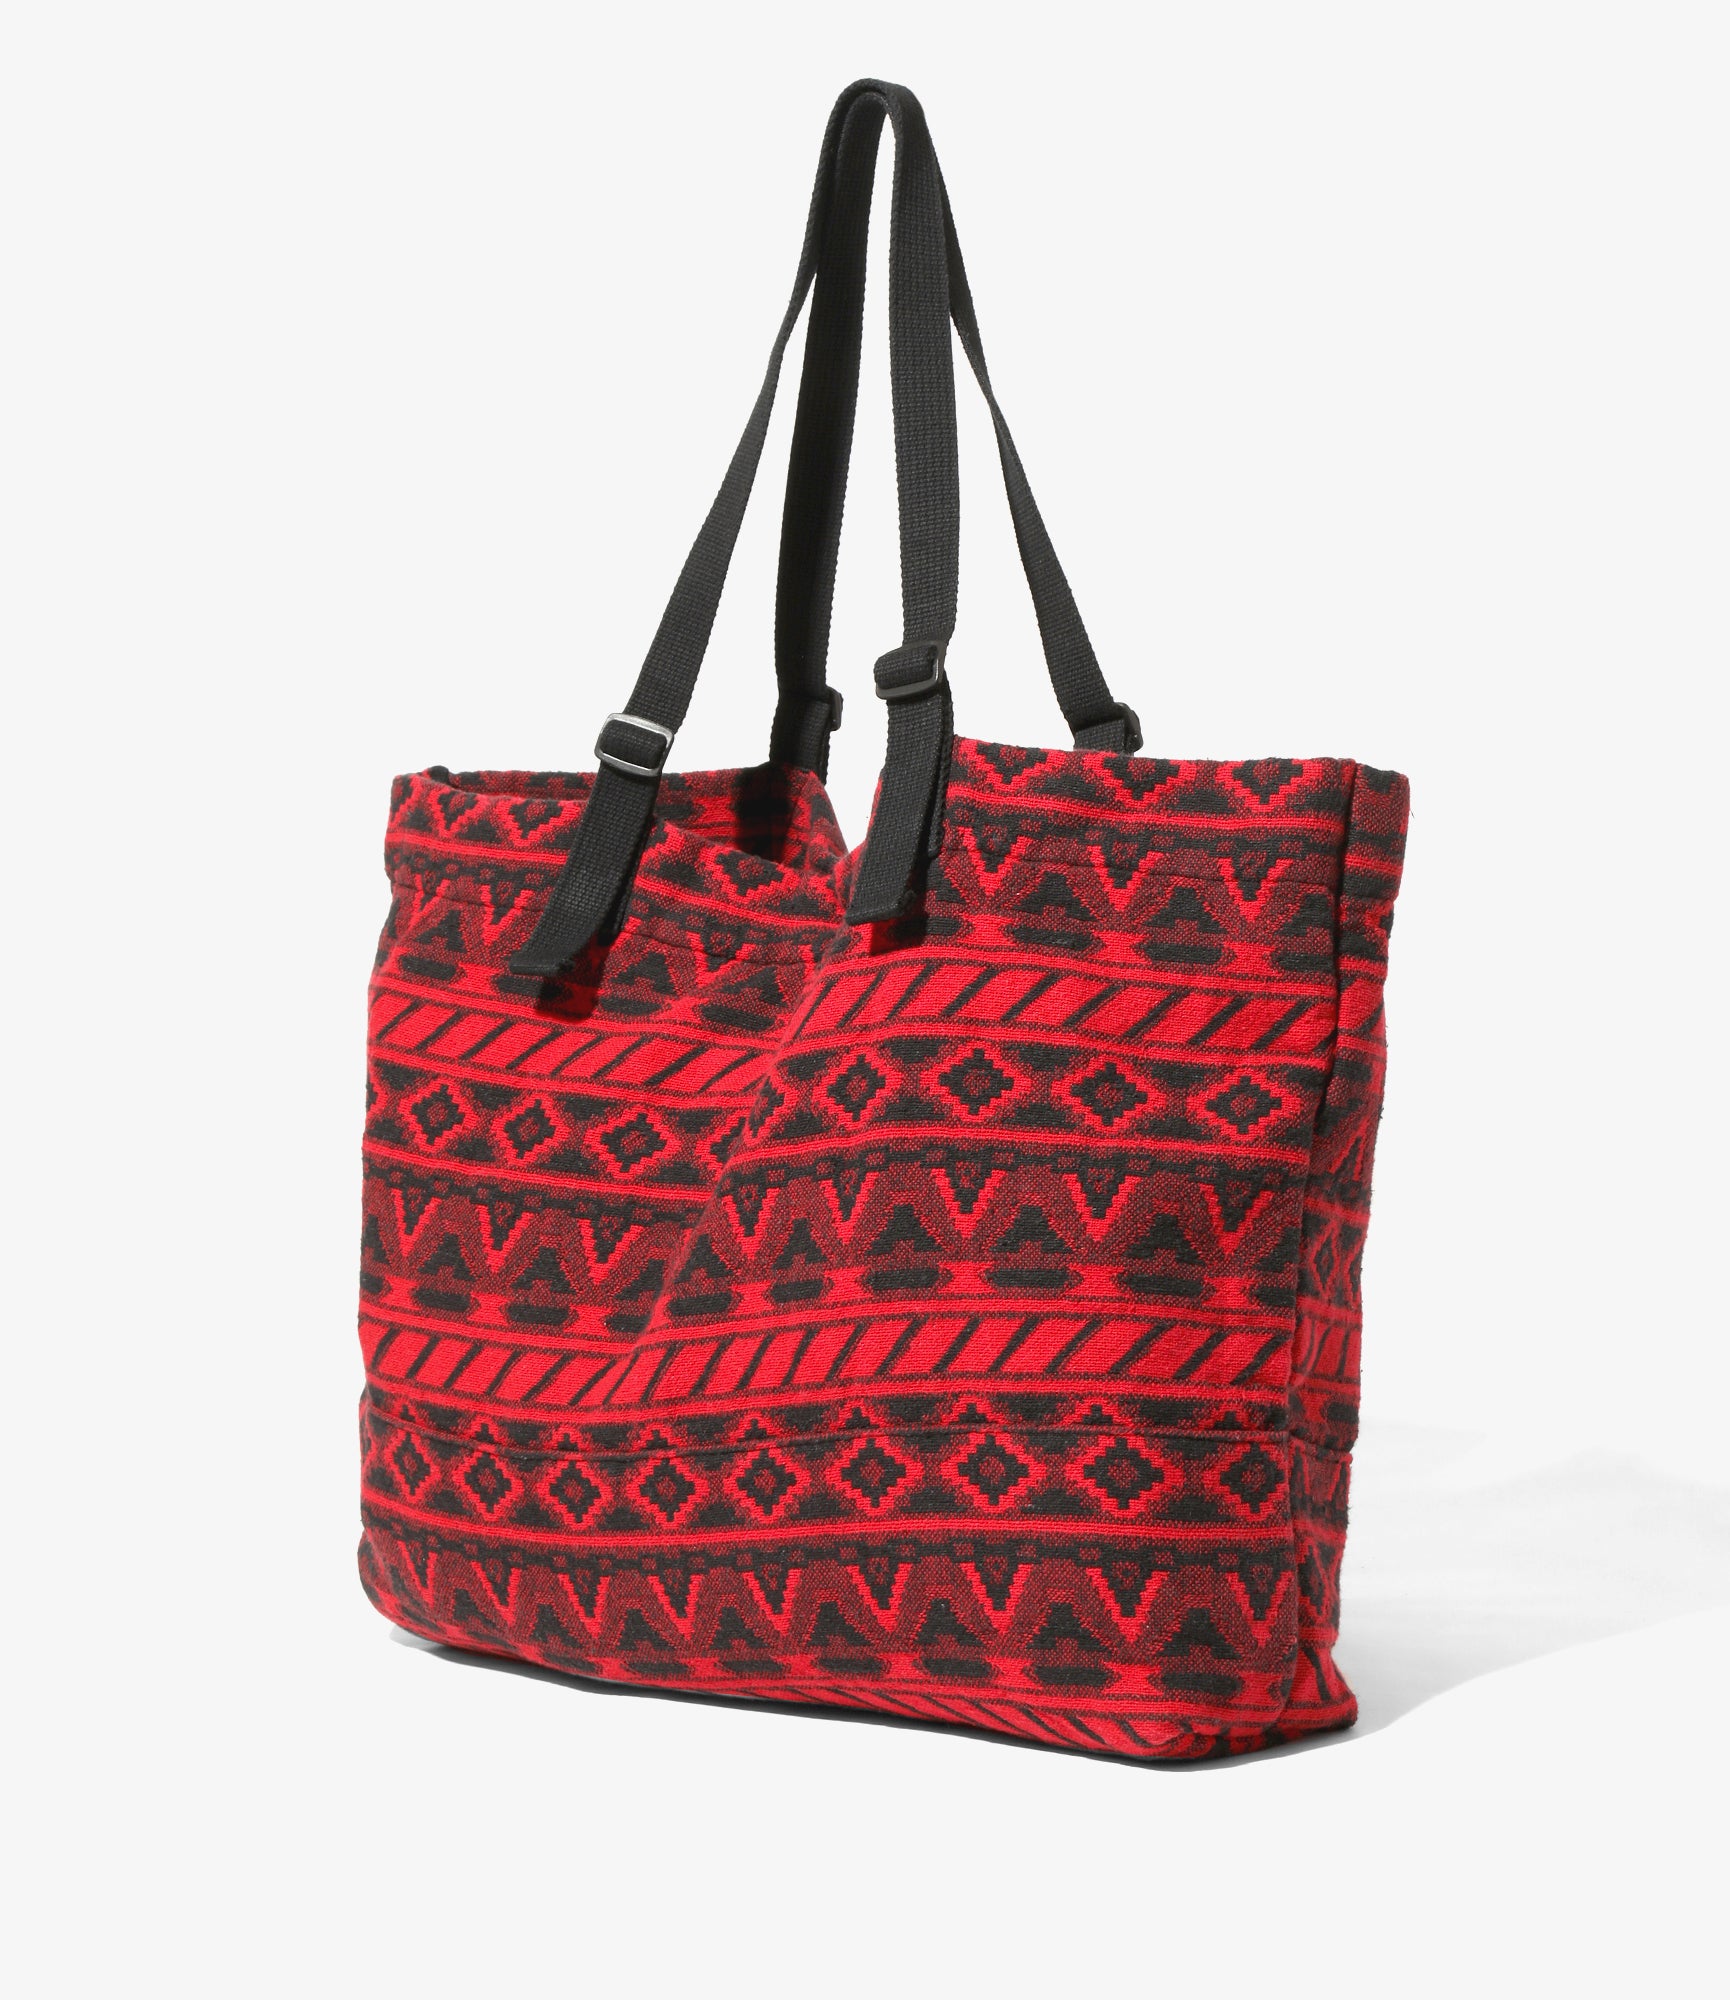 South2 West8 Canal Park Tote - Cotton Dobby / Native Pattern - Red/Black